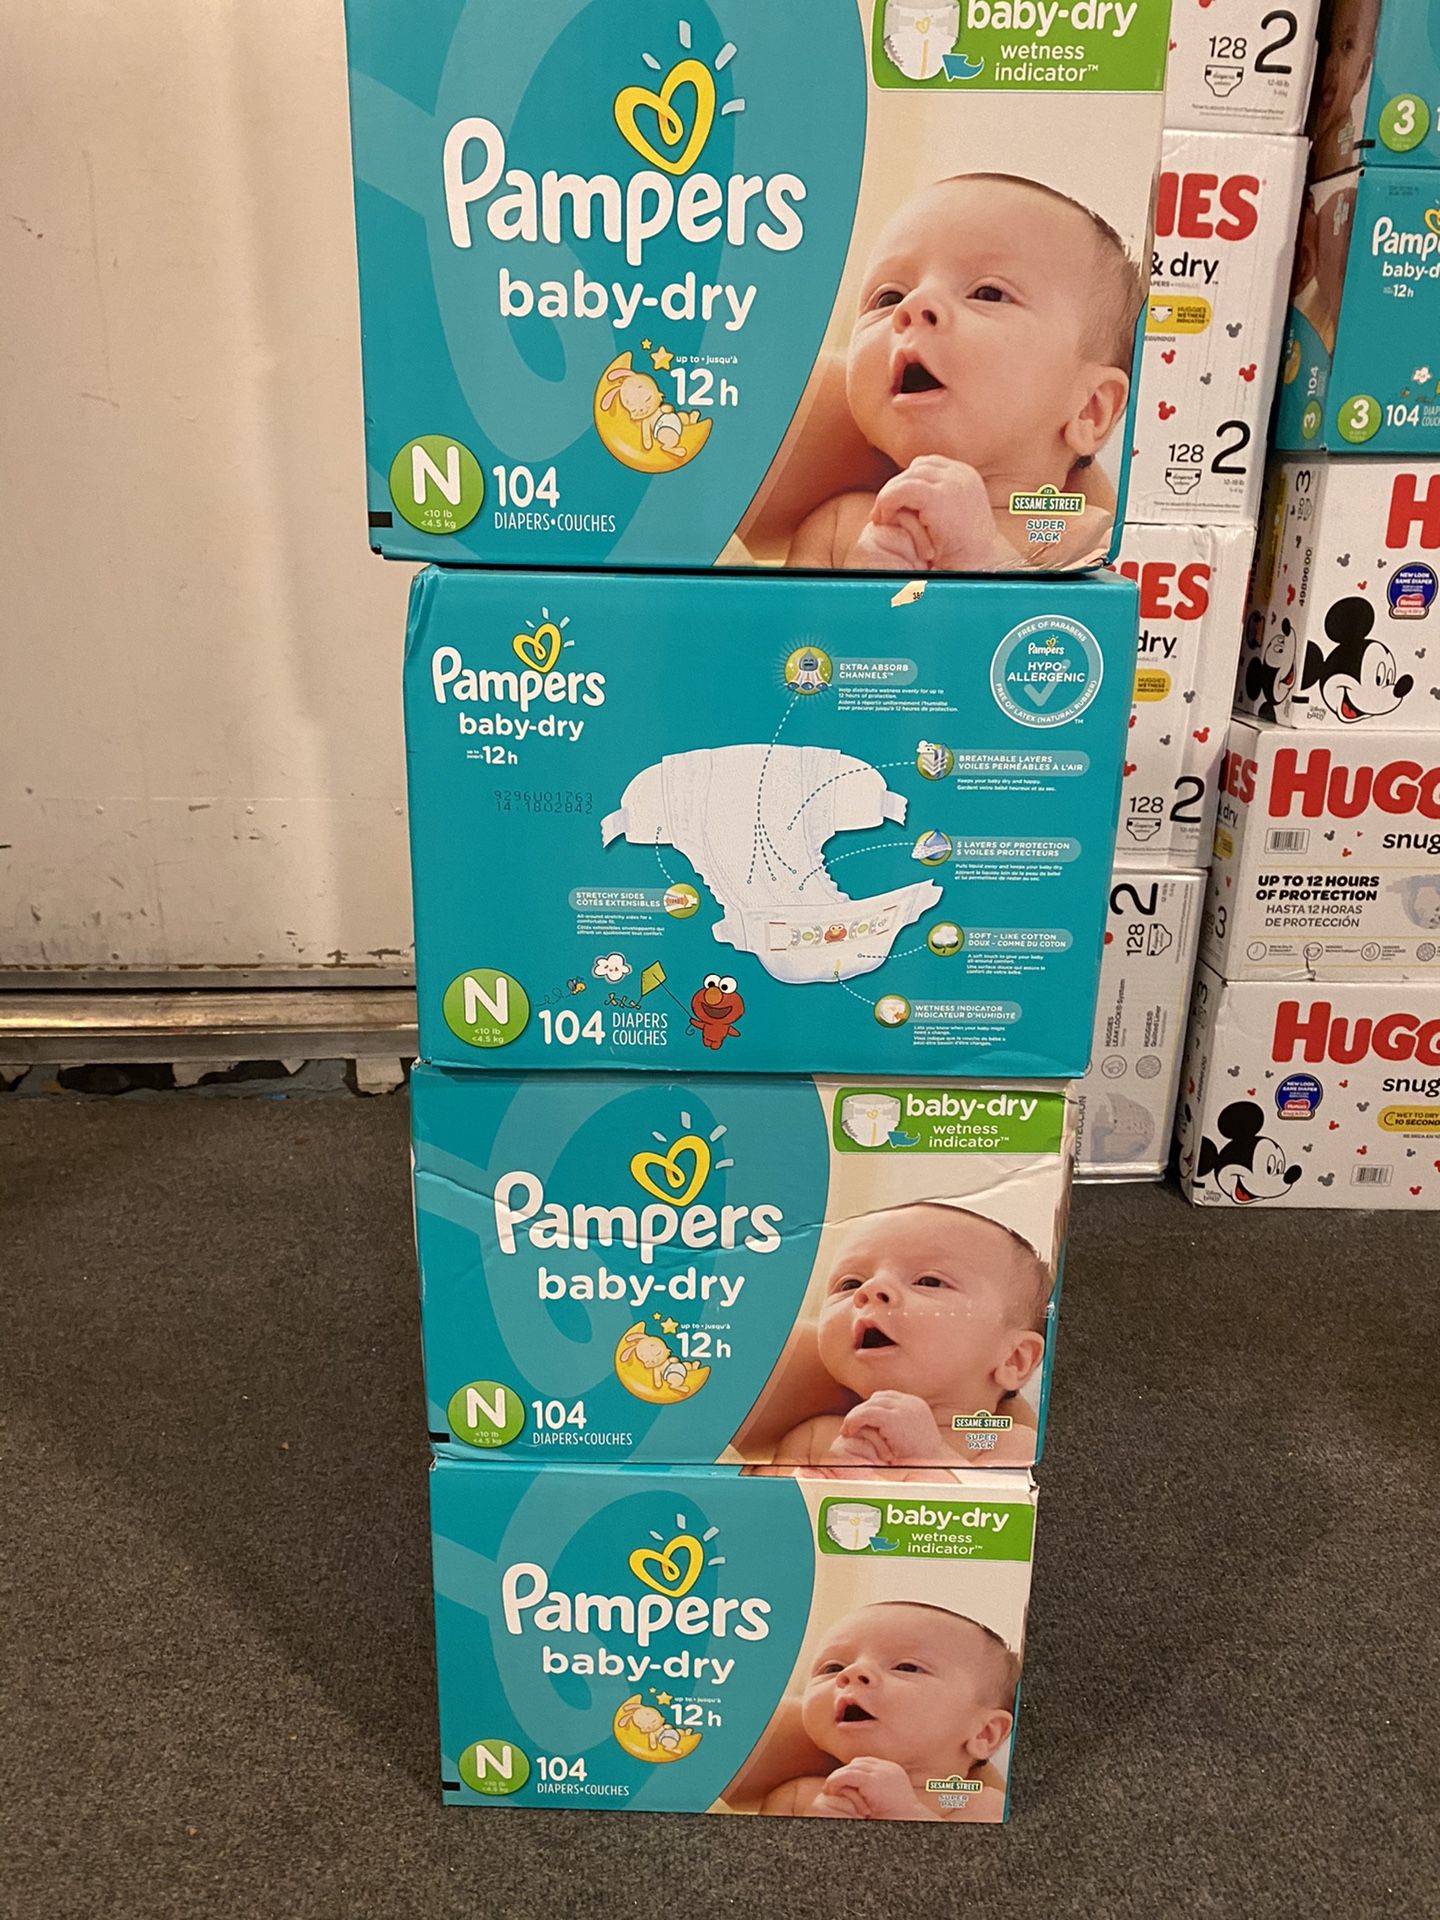 Newborn pampers diapers